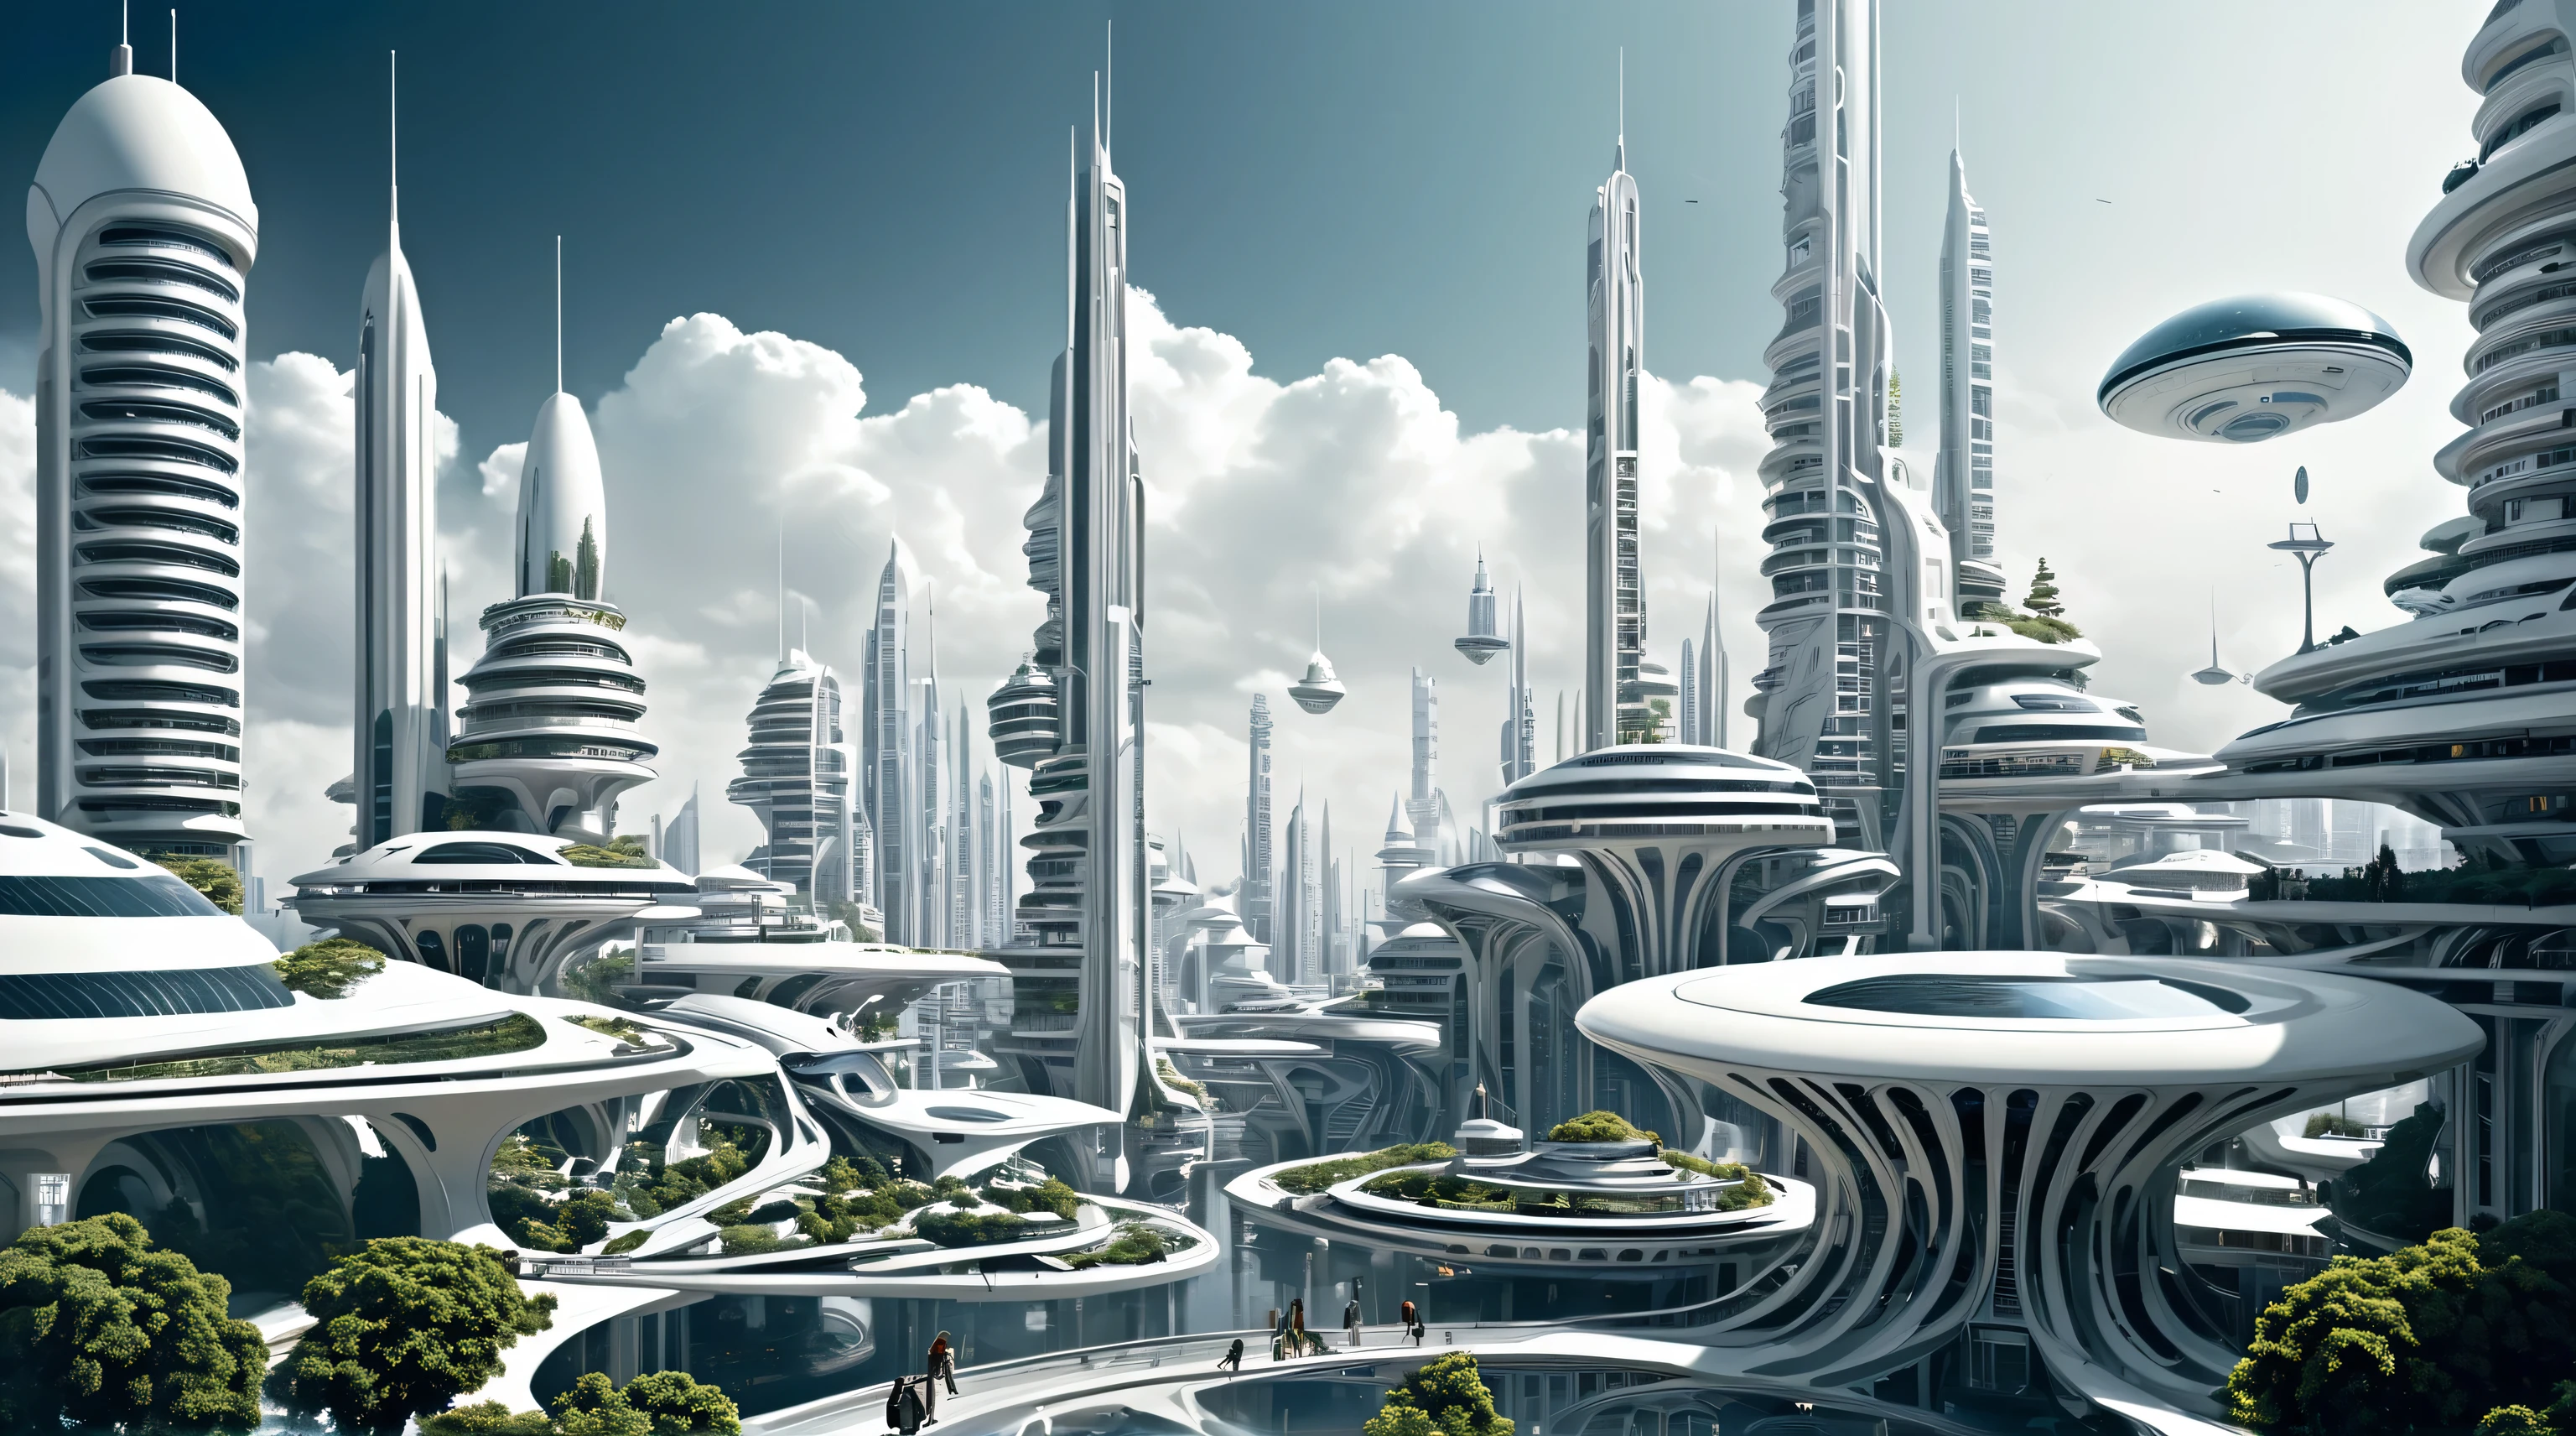 futuristic city with a lot of white buildings and a large flying object, dystopian city of the future, hyper-futuristic city, science fiction city, alien futuristic city, otherwordly futuristic city, futuristic utopian city, Depicted as a science fiction scene, human futuristic city, grand scale、The tightly structured city of Valhalla, Utopian metropolis of the future, Germany&#39;s futuristic city, futuristic city, futuristic alien city